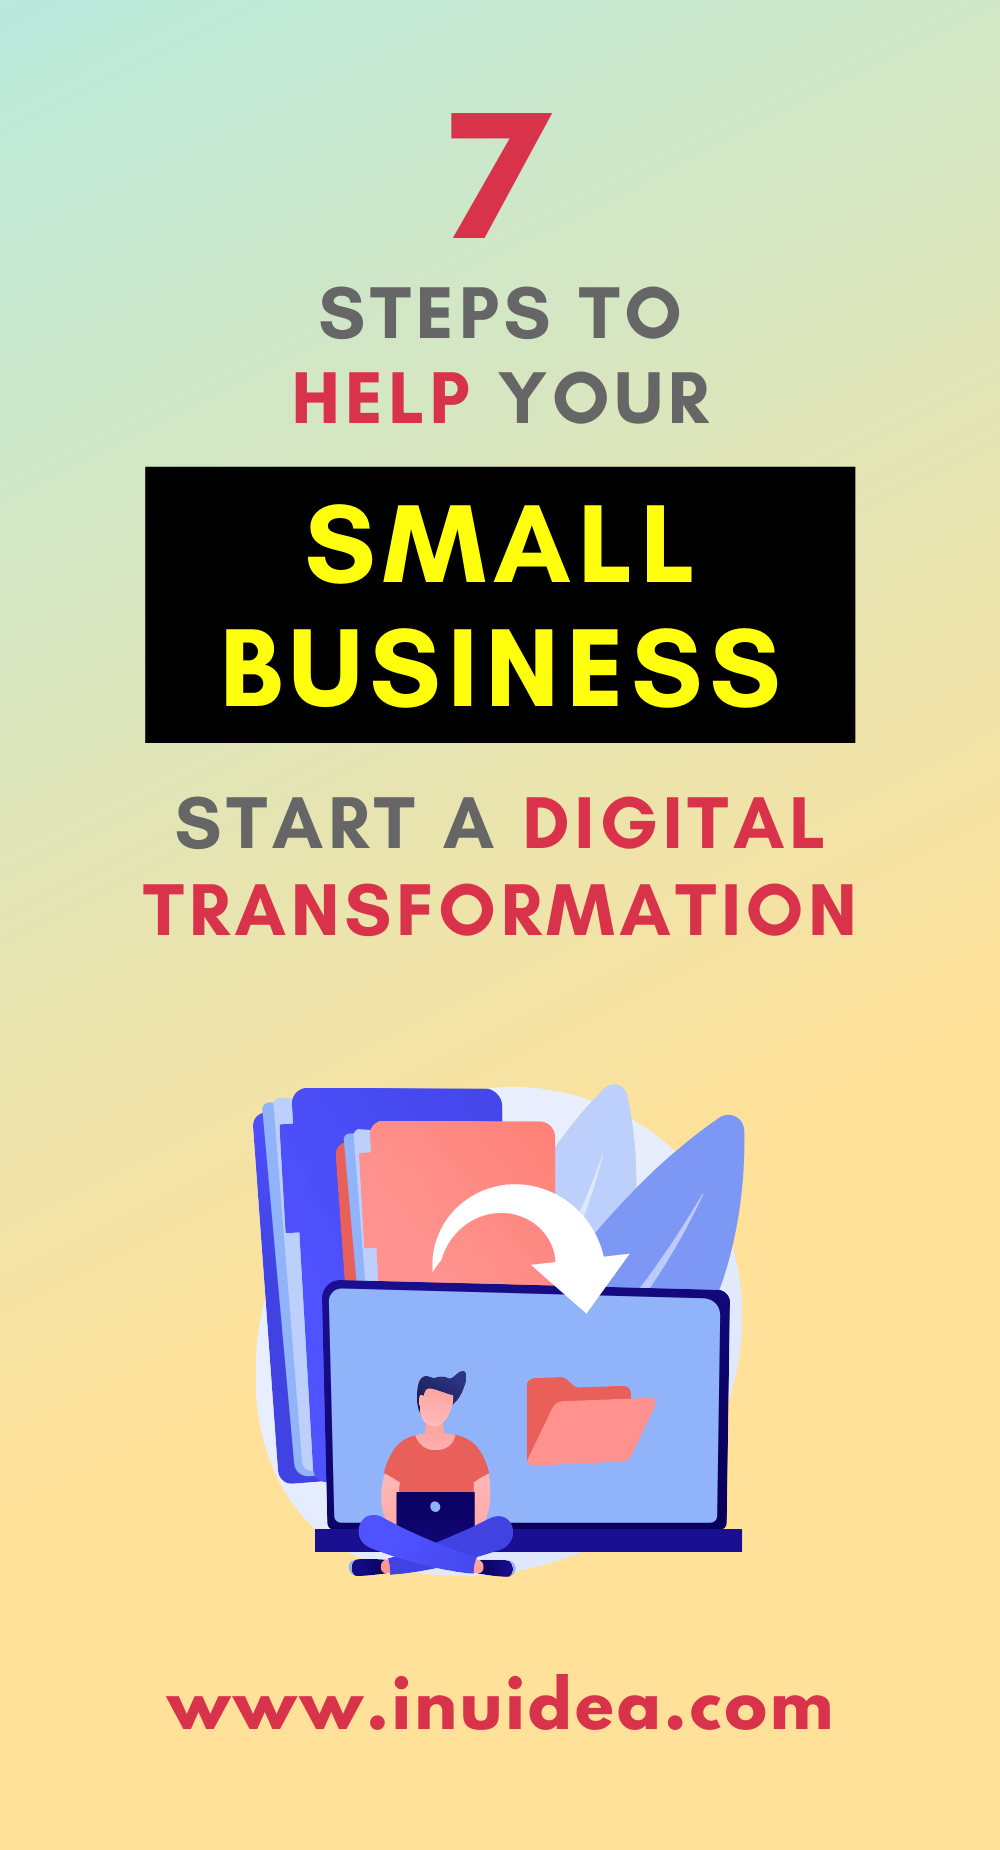 7 Steps To Help Your Small Business Start a Digital Transformation